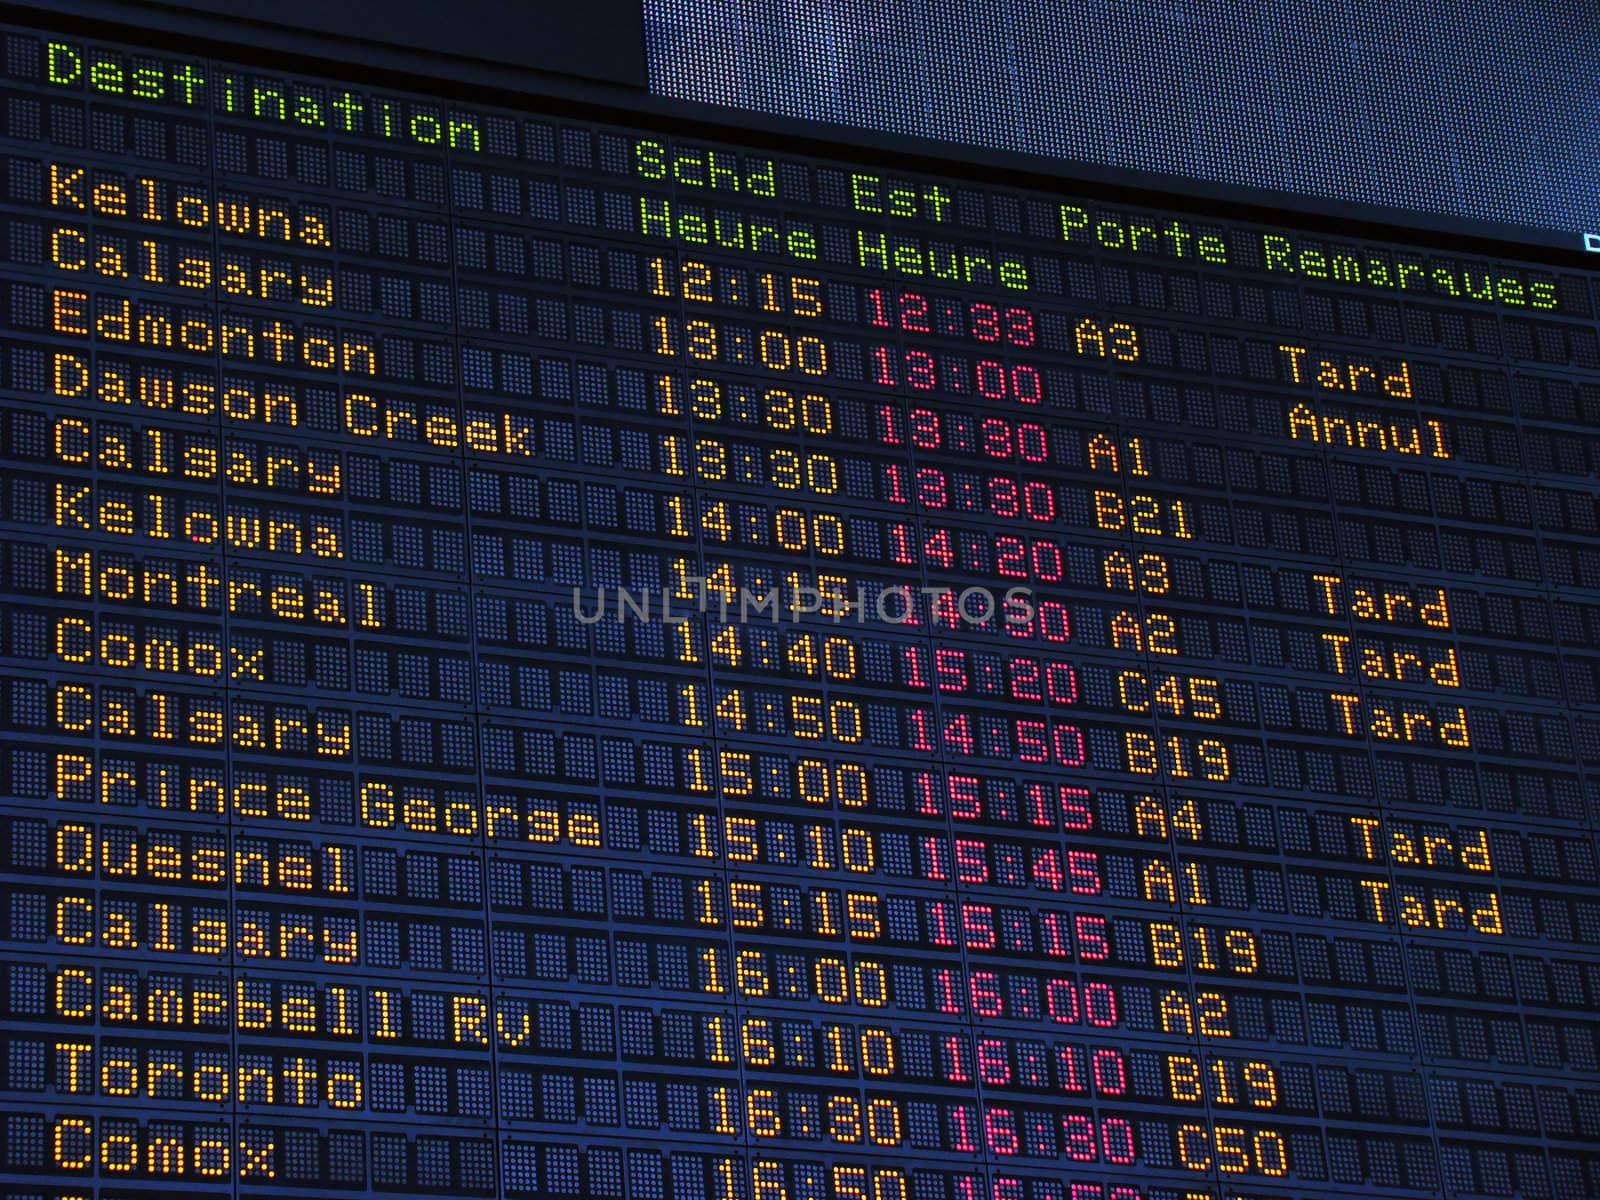 Canadian airport information board, domestic departures.